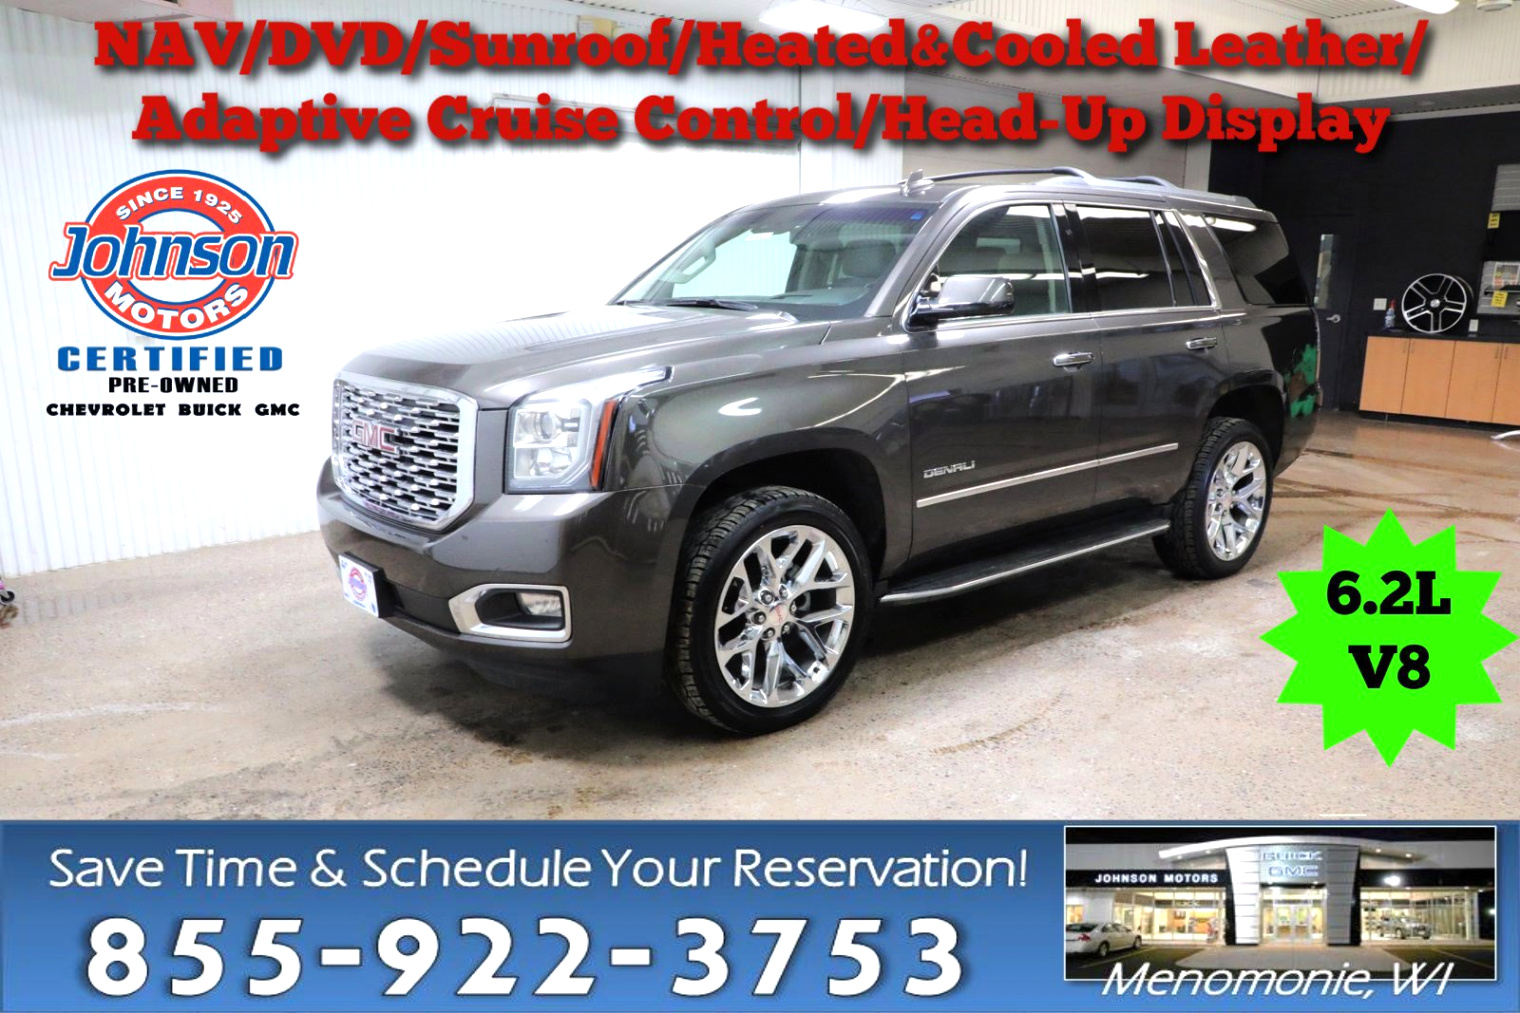 Menominee Wi Car Accident Lawyer Dans Used 2019 Gmc Yukon for Sale at Johnson Motors Vin ...